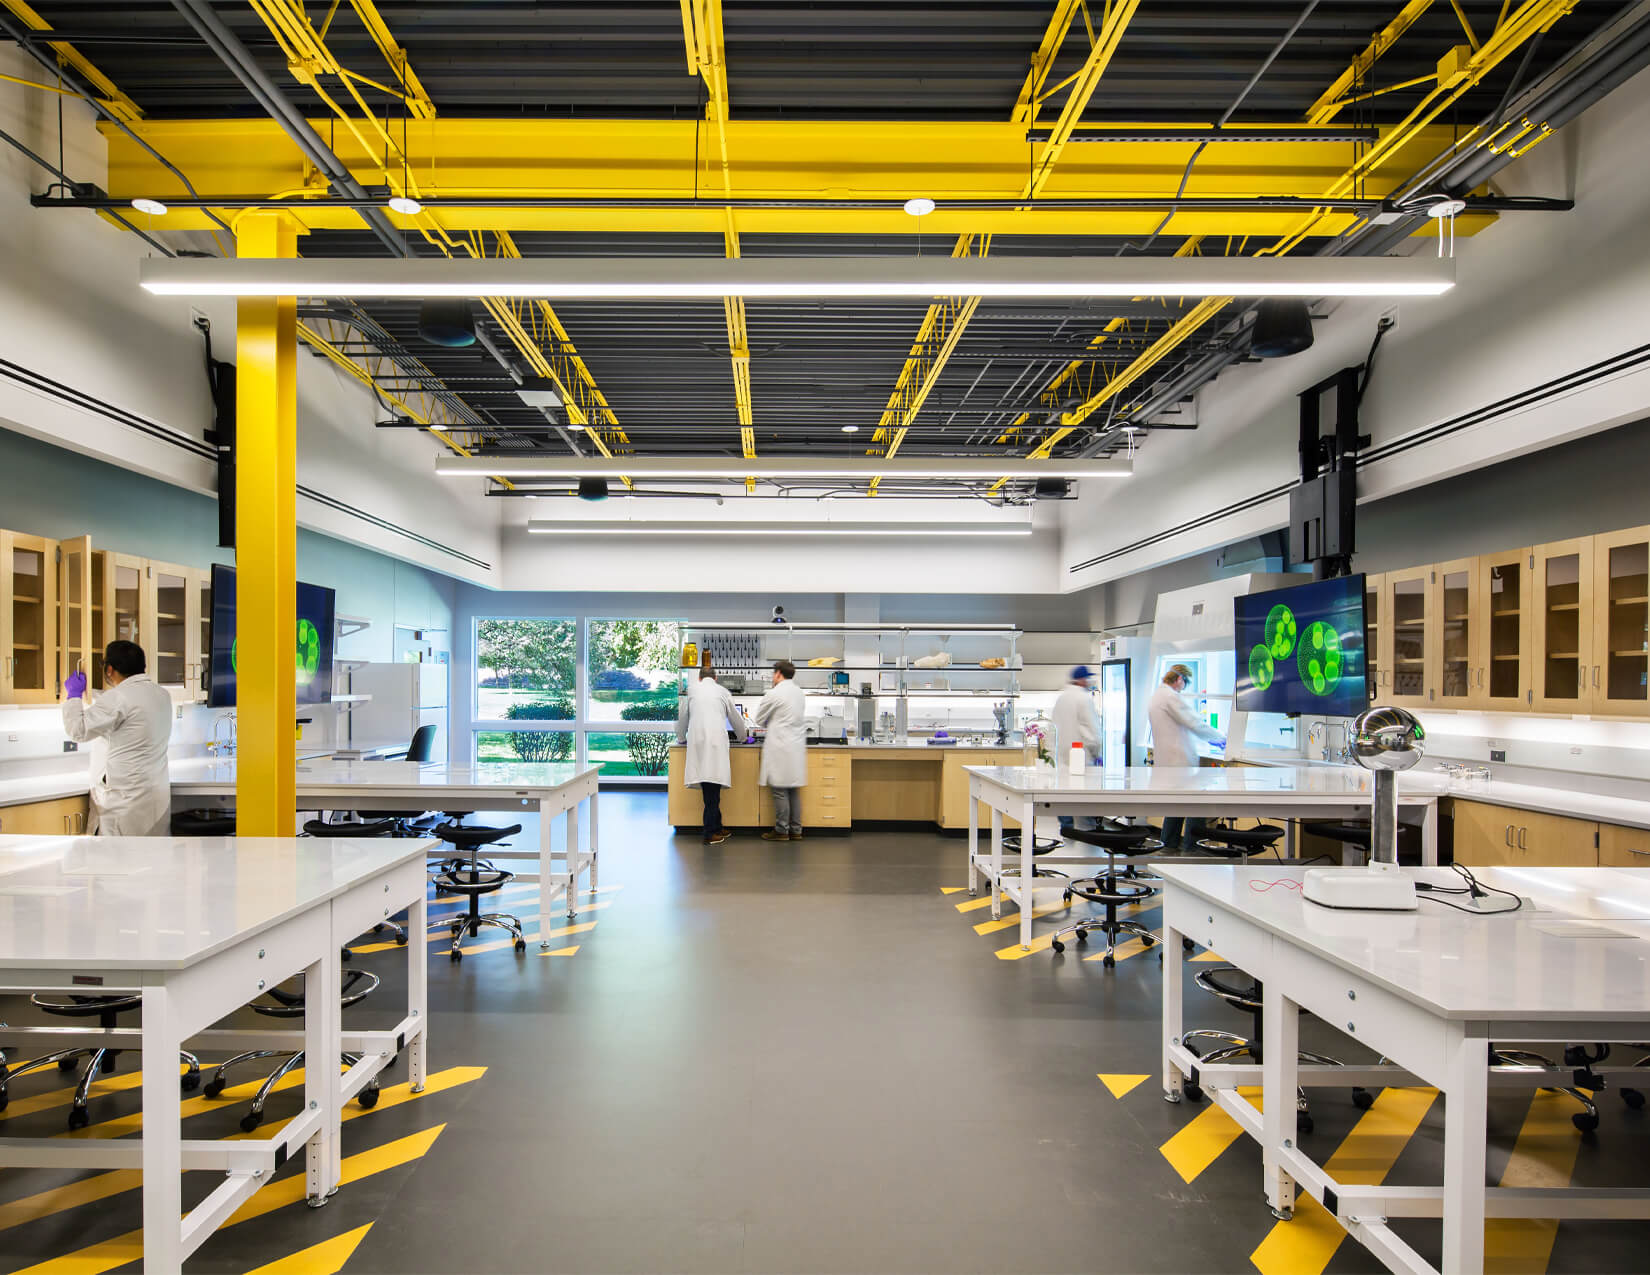 photograph showing the interiors of a new university science lab